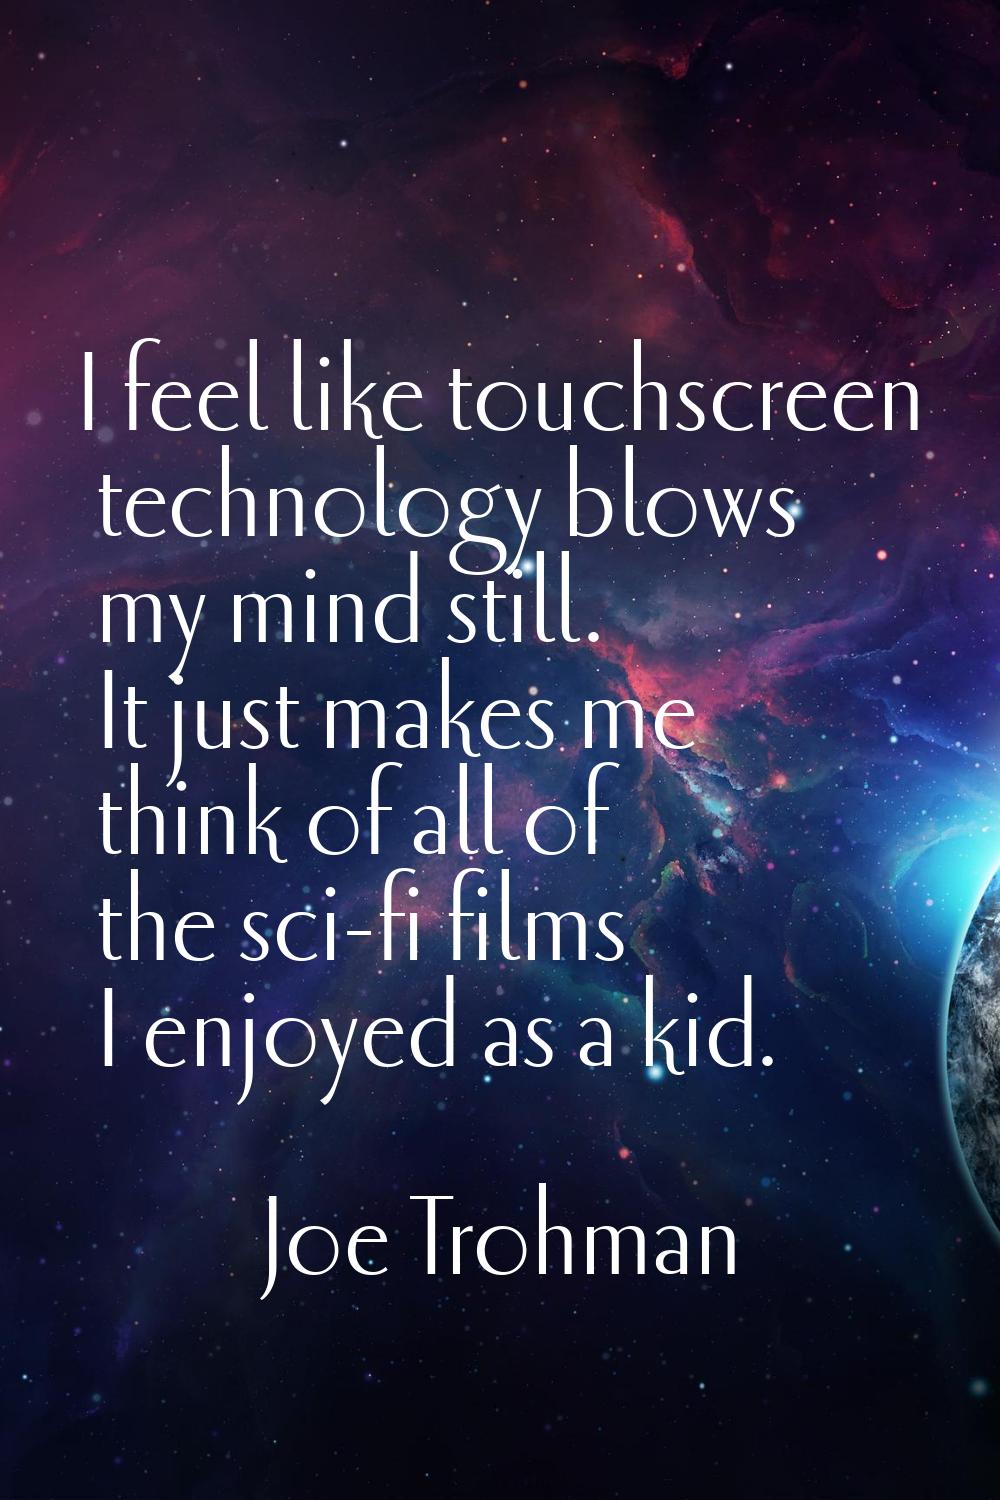 I feel like touchscreen technology blows my mind still. It just makes me think of all of the sci-fi